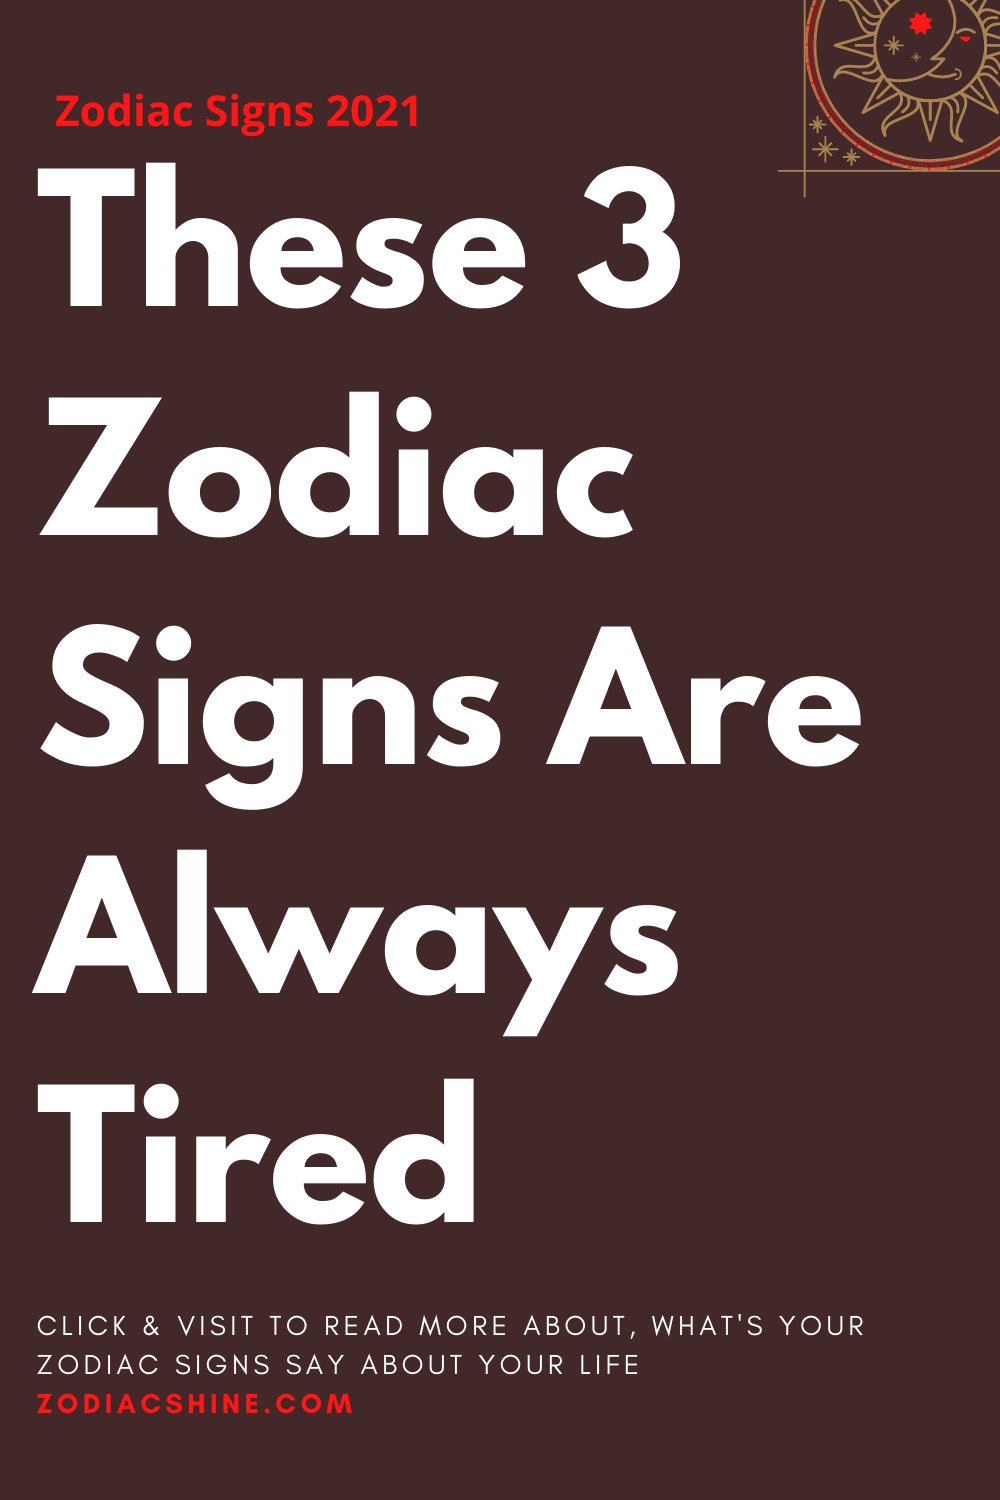 These 3 Zodiac Signs Are Always Tired